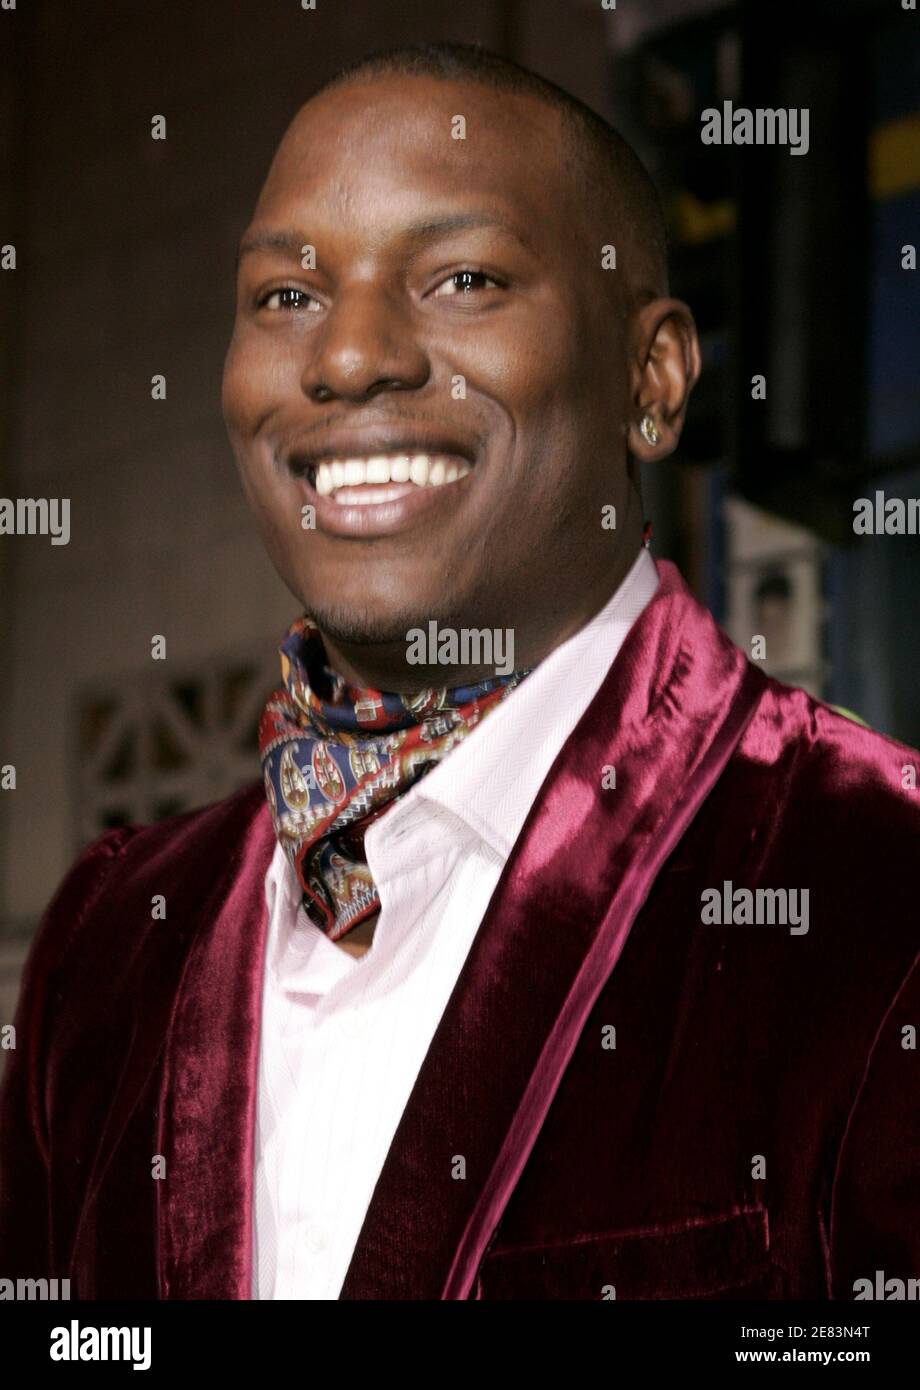 Actor Tyrese Gibson poses during the premiere of his new film 'Annapolis' in Hollywood January 23, 2006. The film is about a group of young men and [women preparing for a career in the United States Naval Academy in Annapolis. The film also stars James Franco and Jordana Brewster and it opens January 27 in the U.S.] Stock Photo